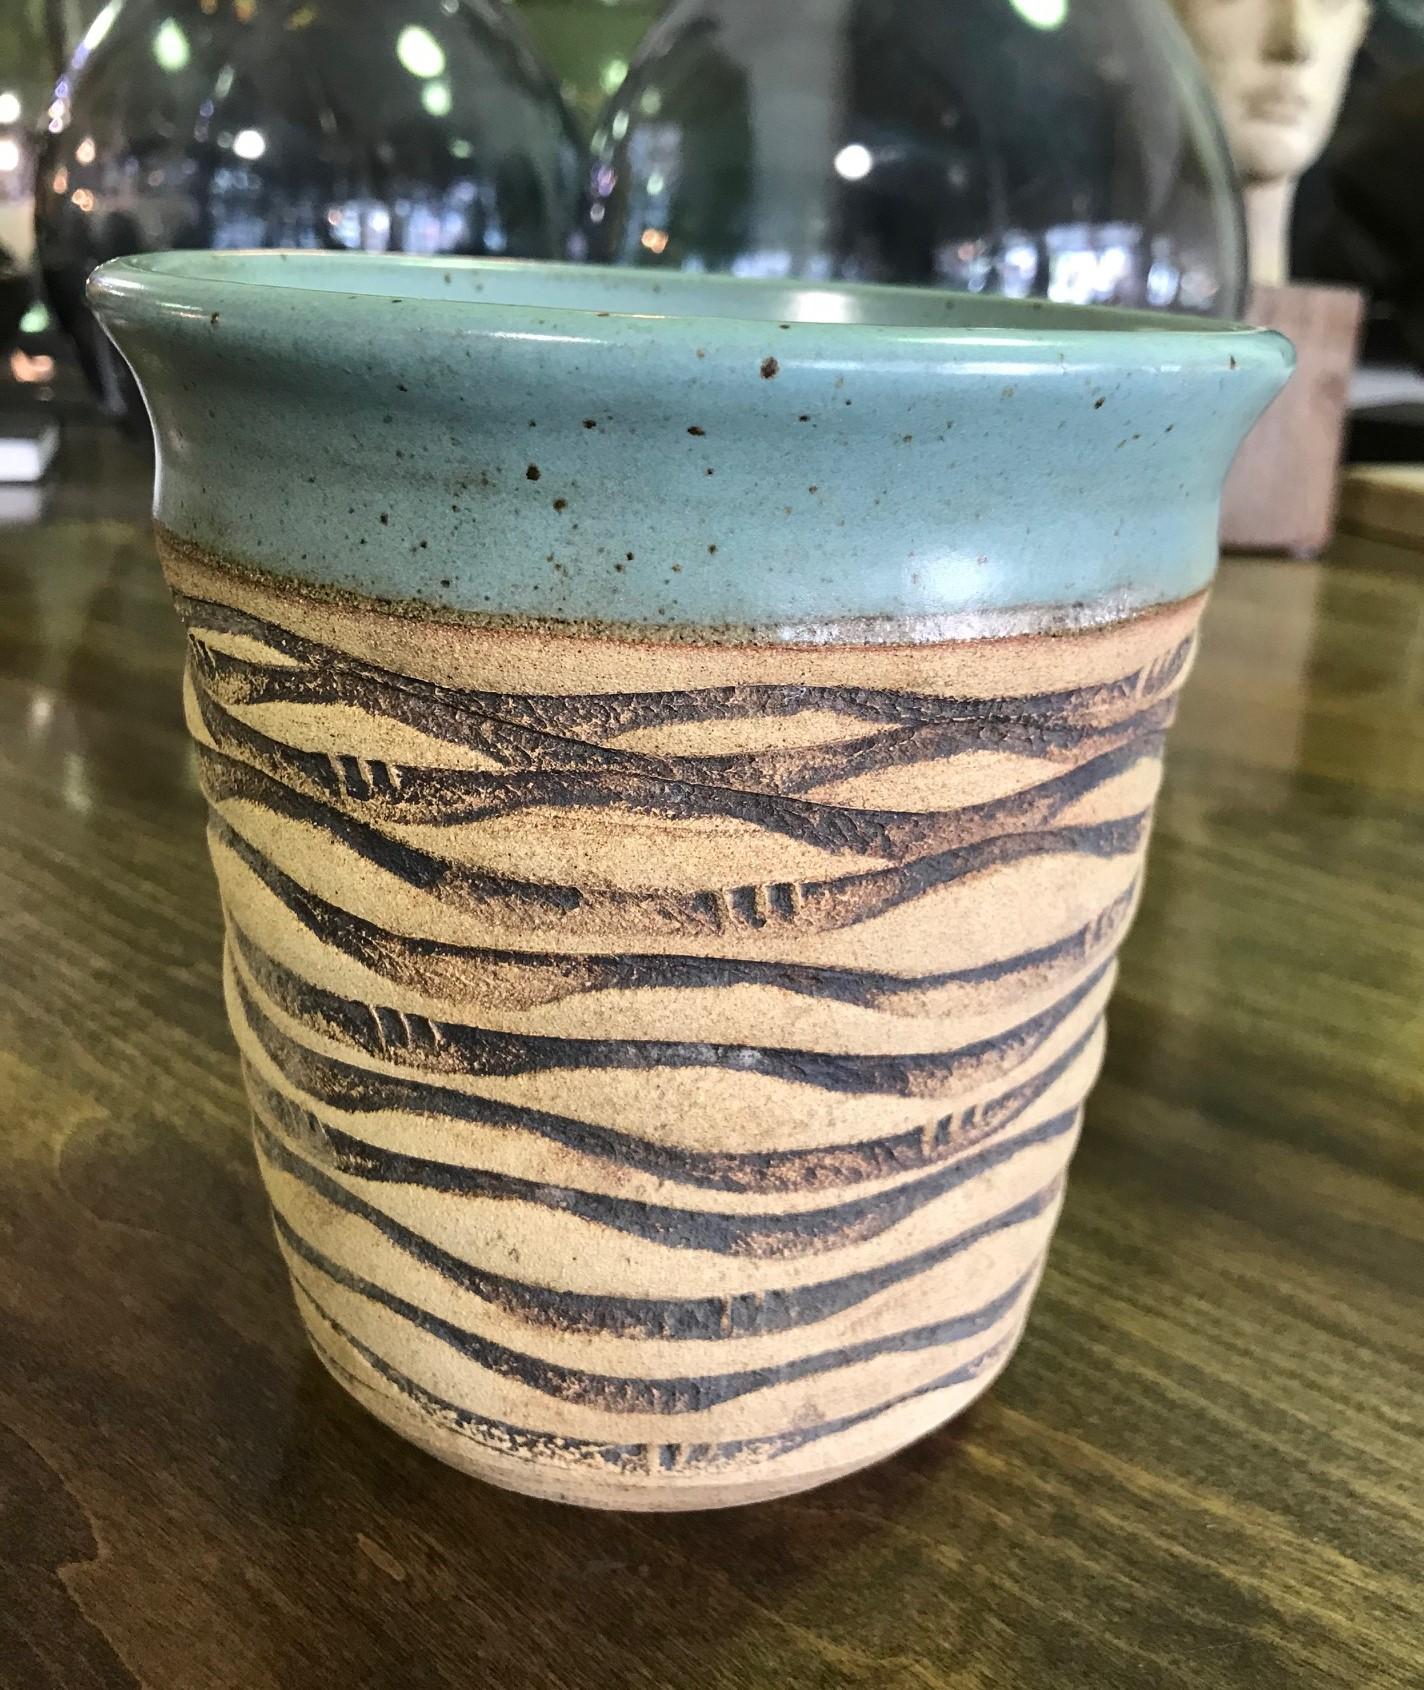 A gorgeous colored, wonderfully textured, midcentury pottery bowl or vase by renowned master potter F. Carlton Ball.

Ball, who studied with Glen Lukens, taught at University of Southern California between 1956-1967 and later at University of